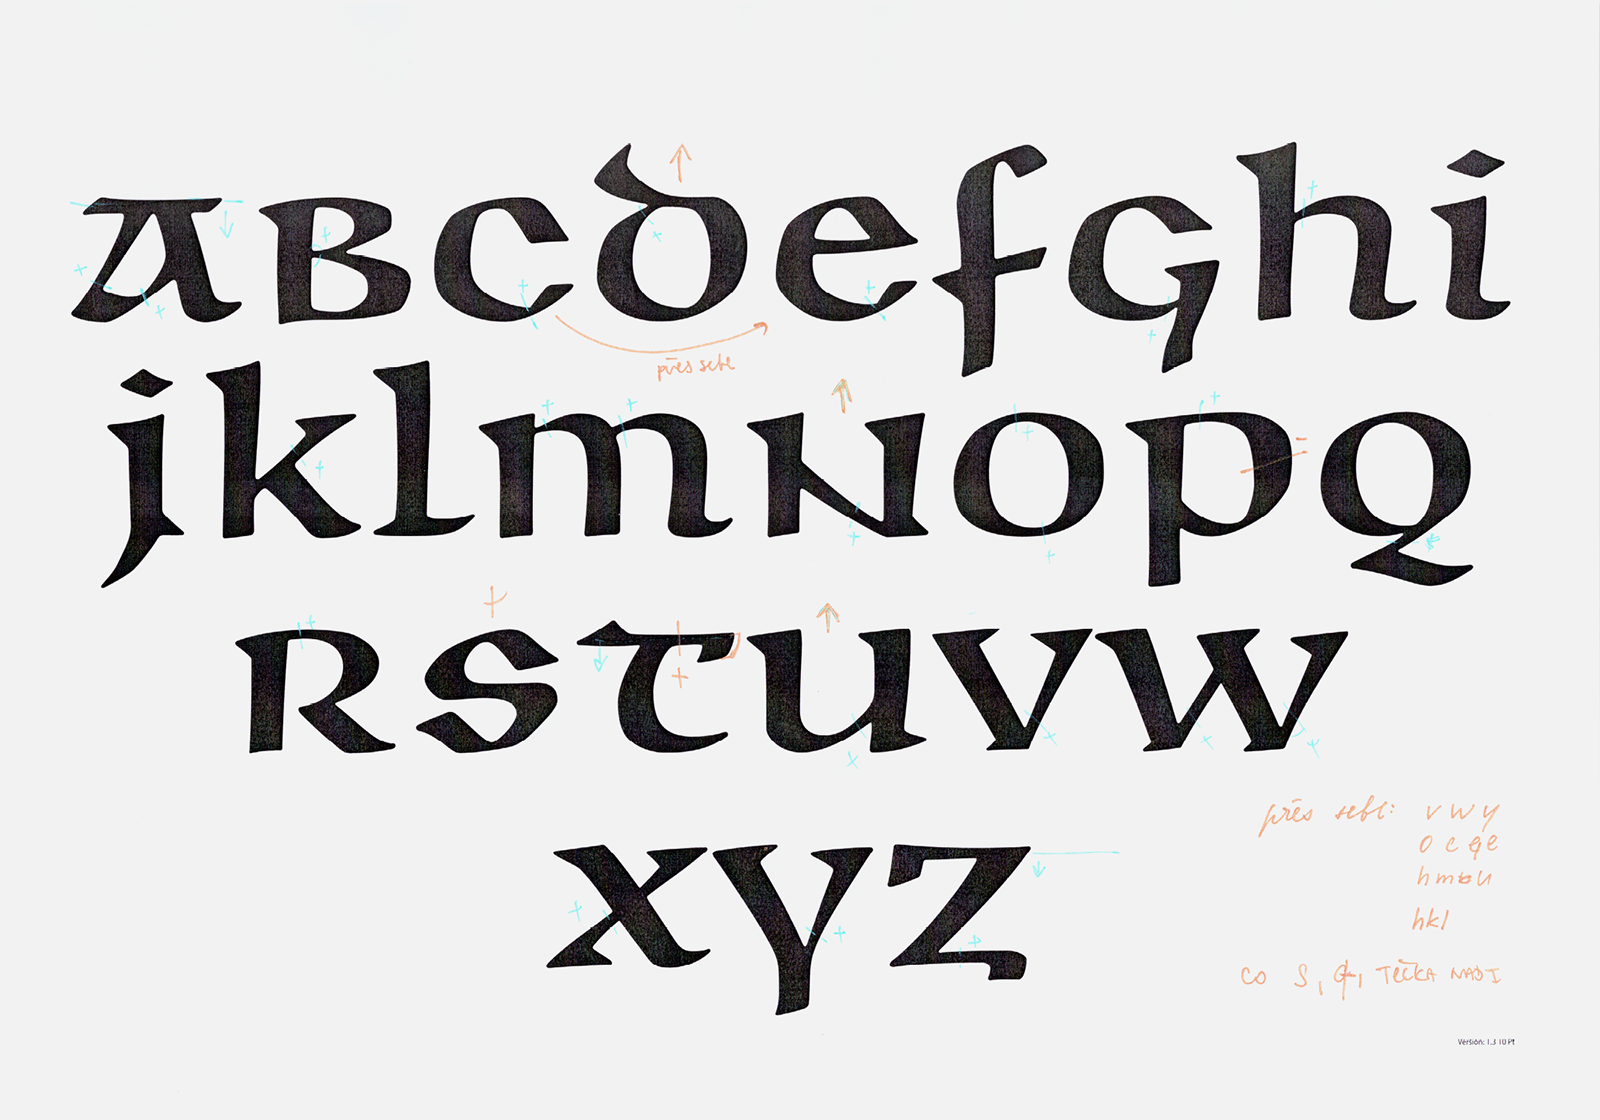 A series of corrections to the Unciála typeface carried out on the authentic version.